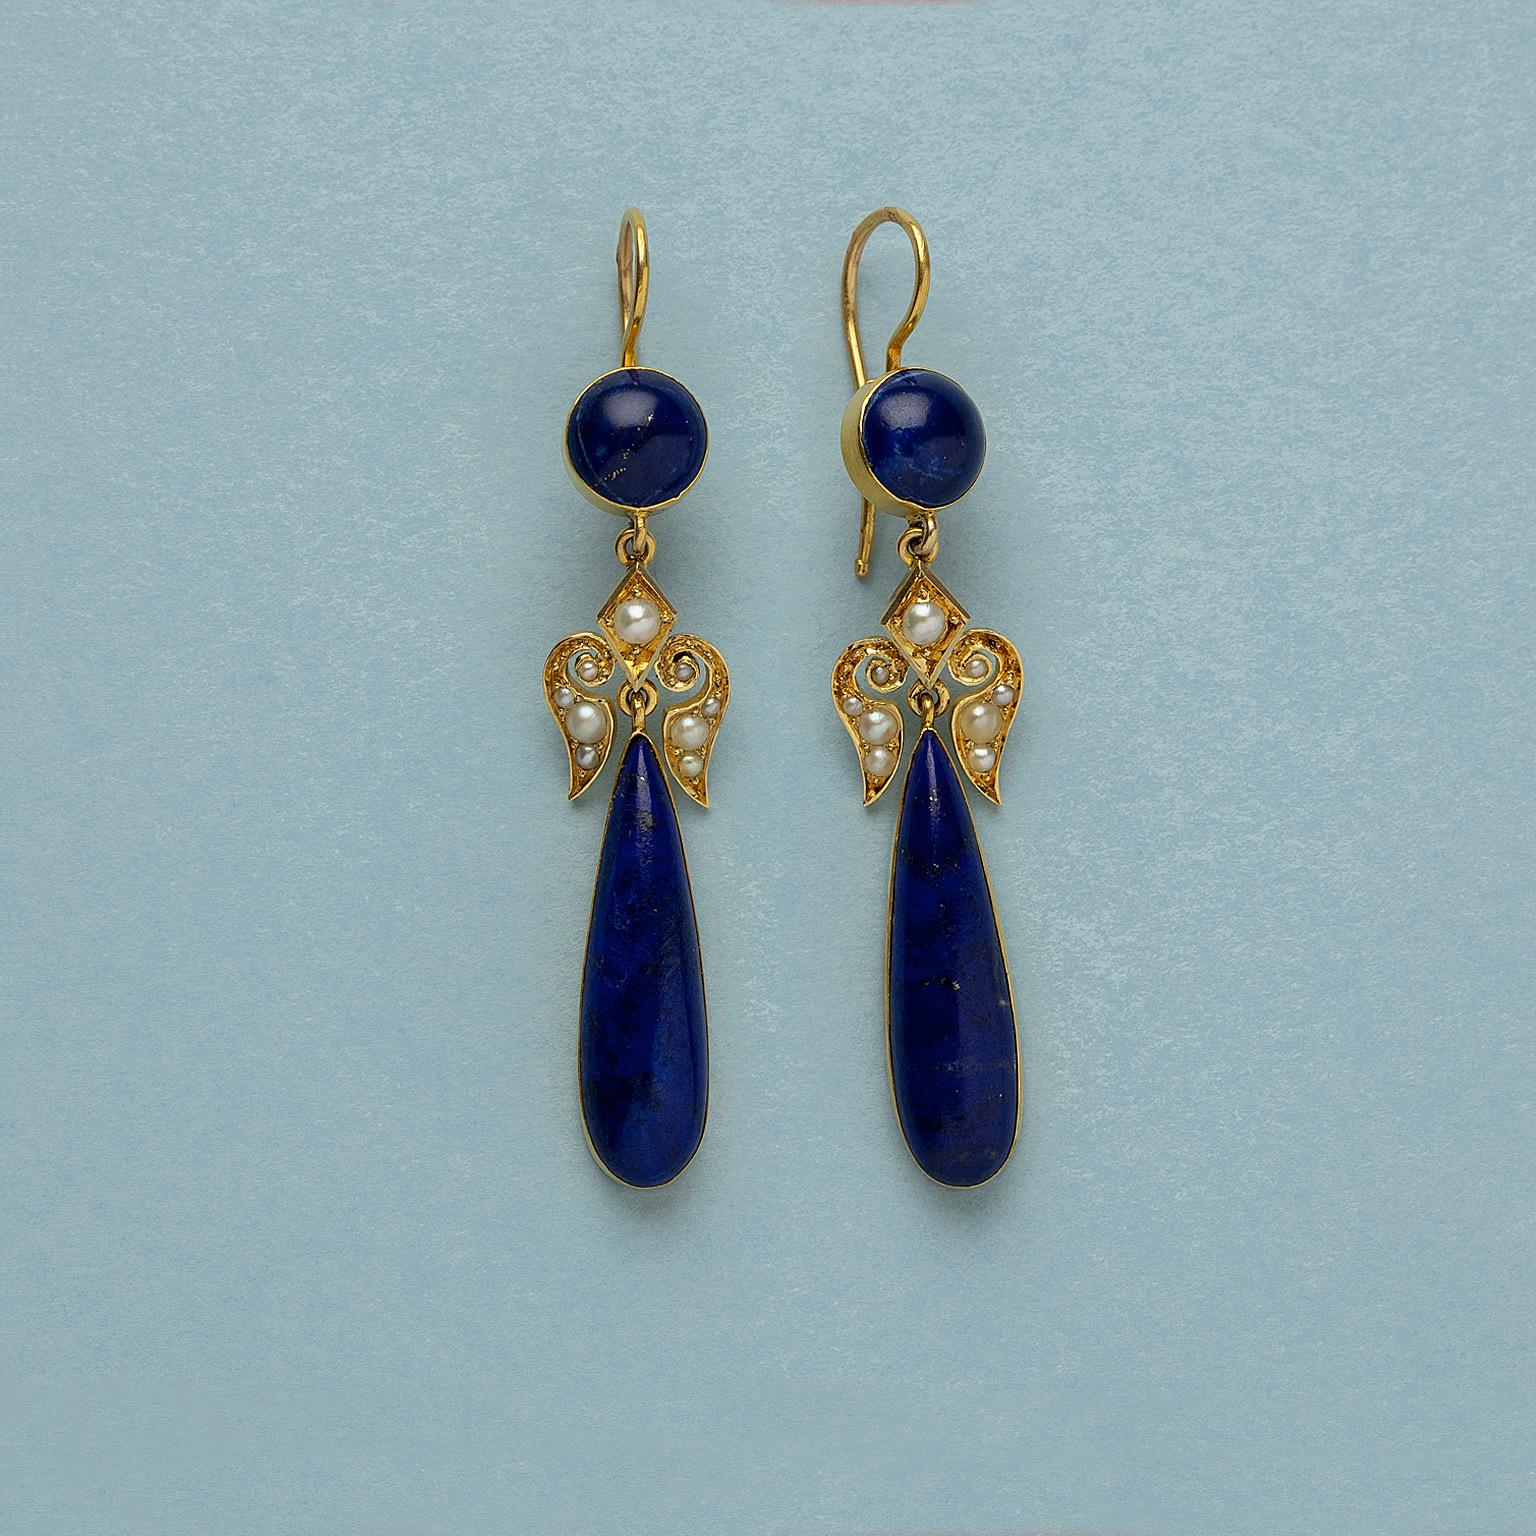 A pair of 14 or 15 carat gold earrings with a round cabochon cut lapis lazuli in a gold setting, below is a fleur de l’ys set with pearls, and a dangling pendant with a long pear shaped lapis lazuli, England, end 19th century.

weight: 10.84